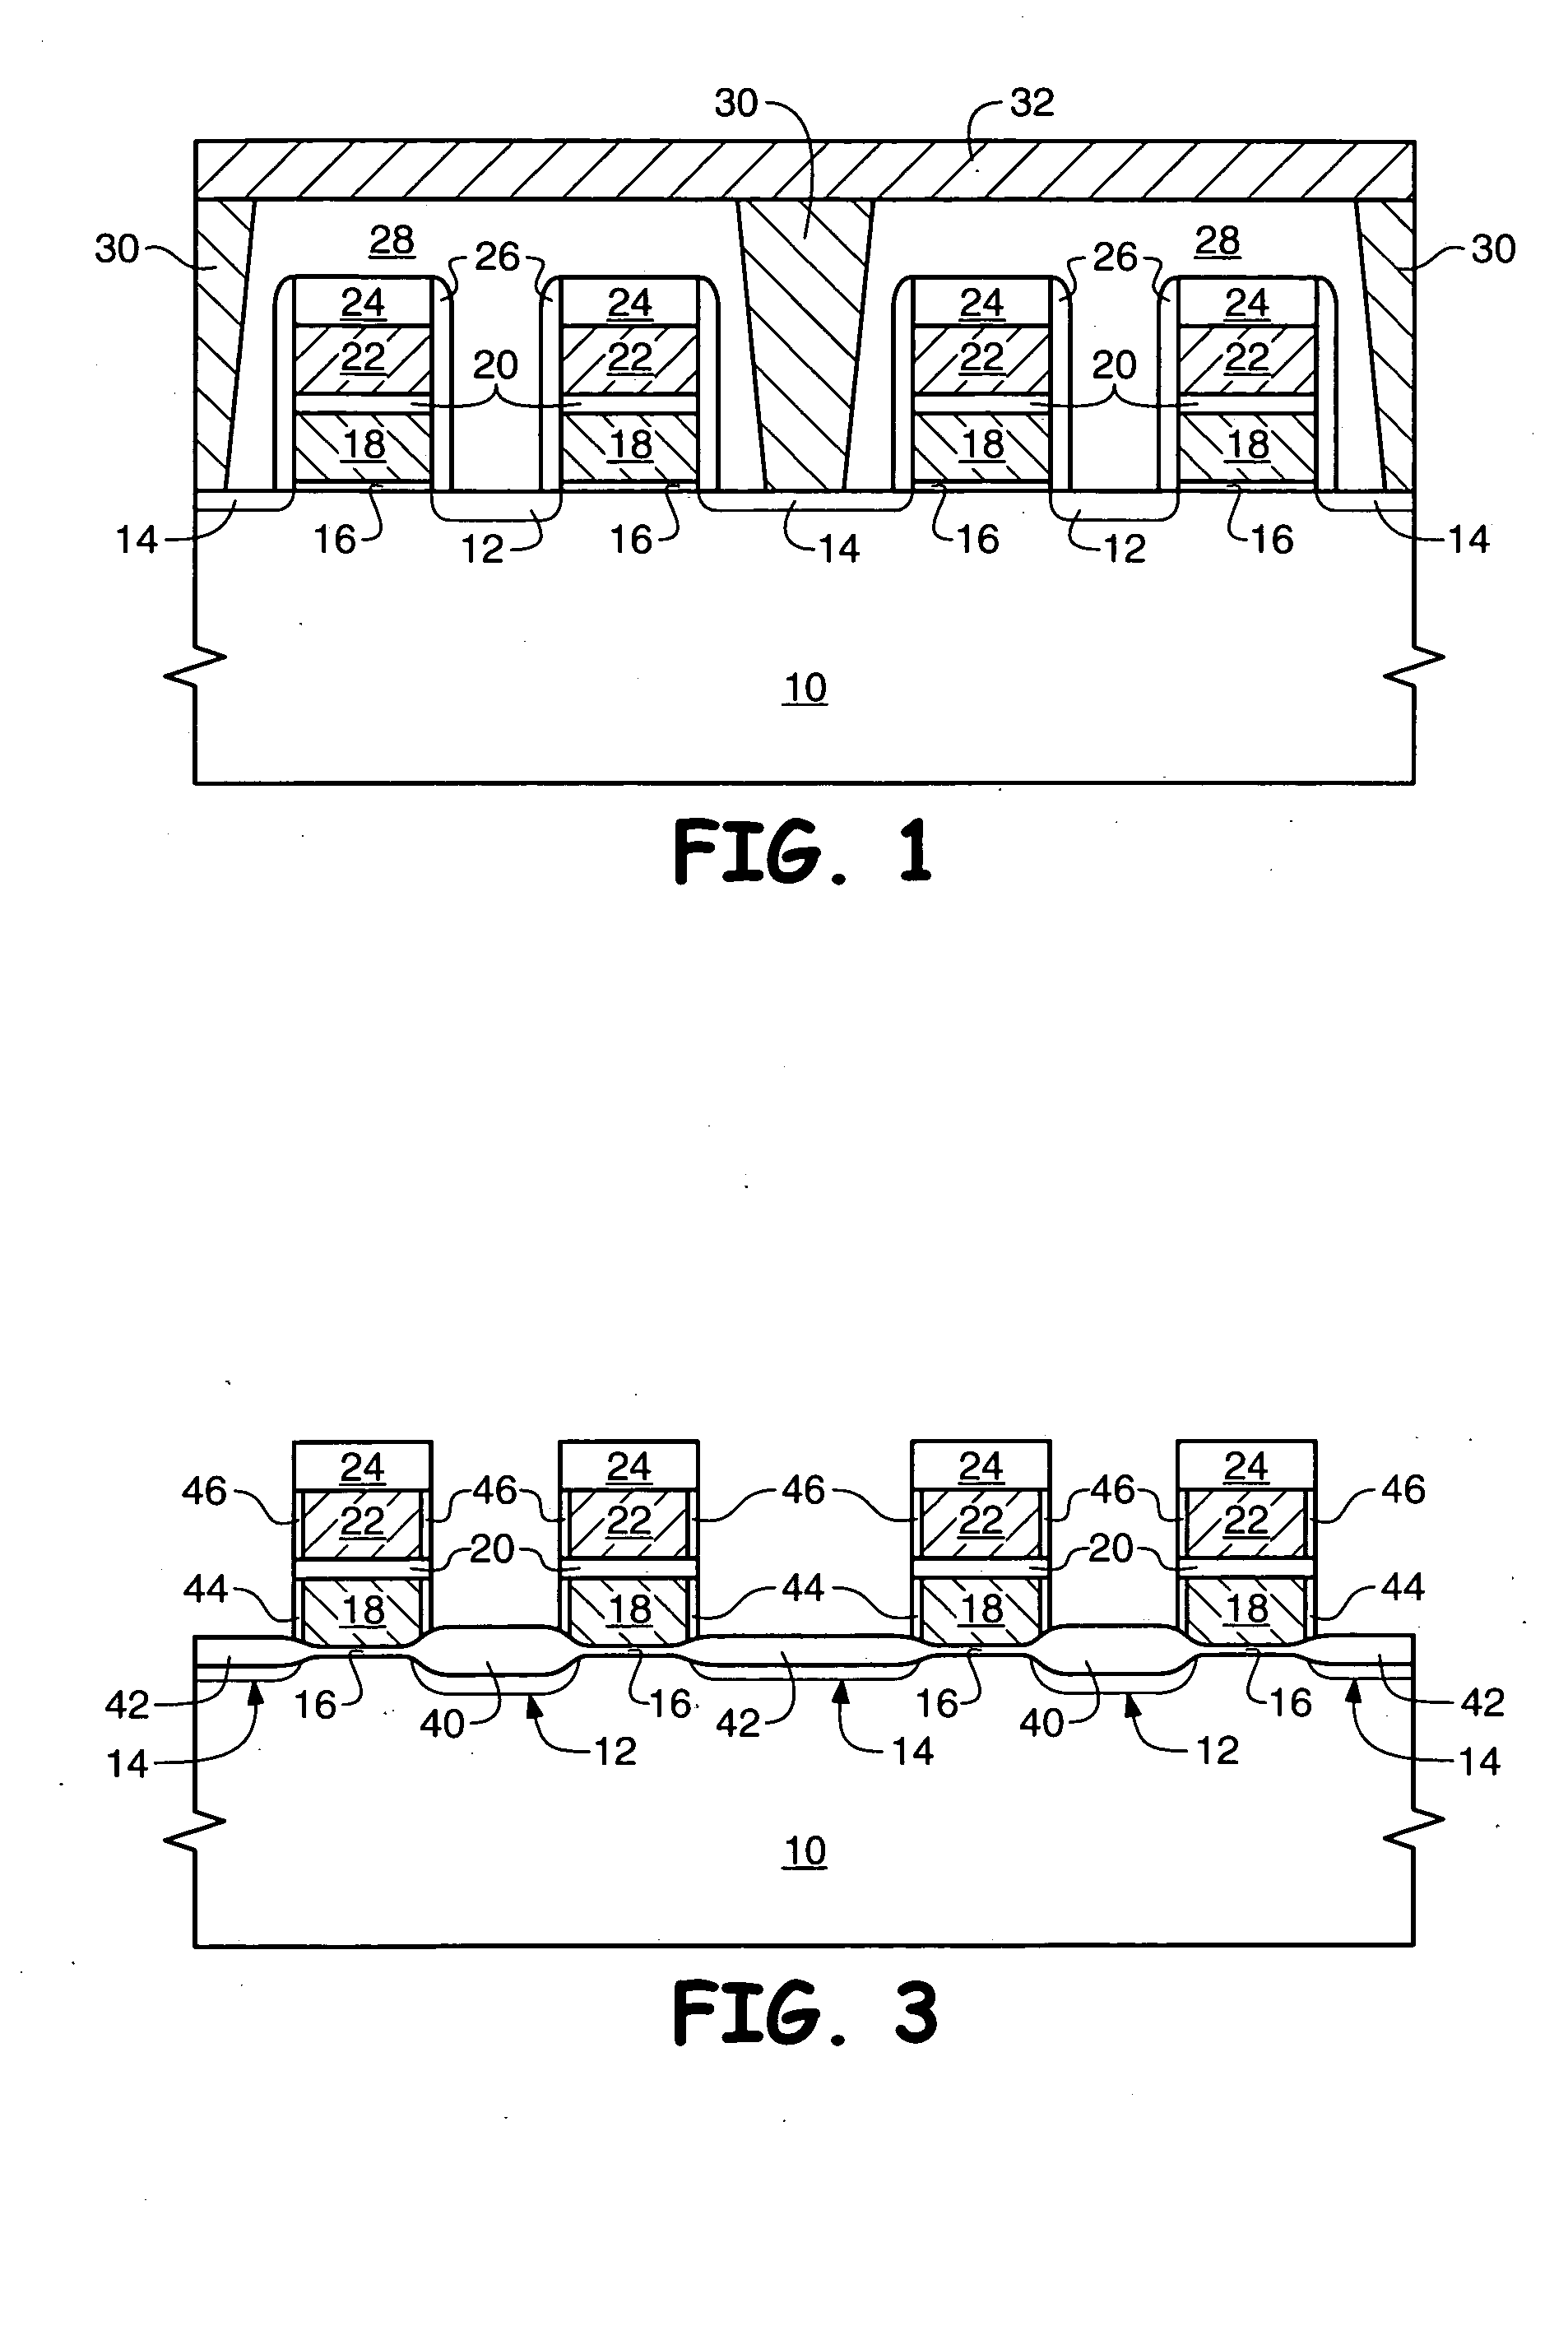 Use of selective oxidation to form asymmetrical oxide features during the manufacture of a semiconductor device